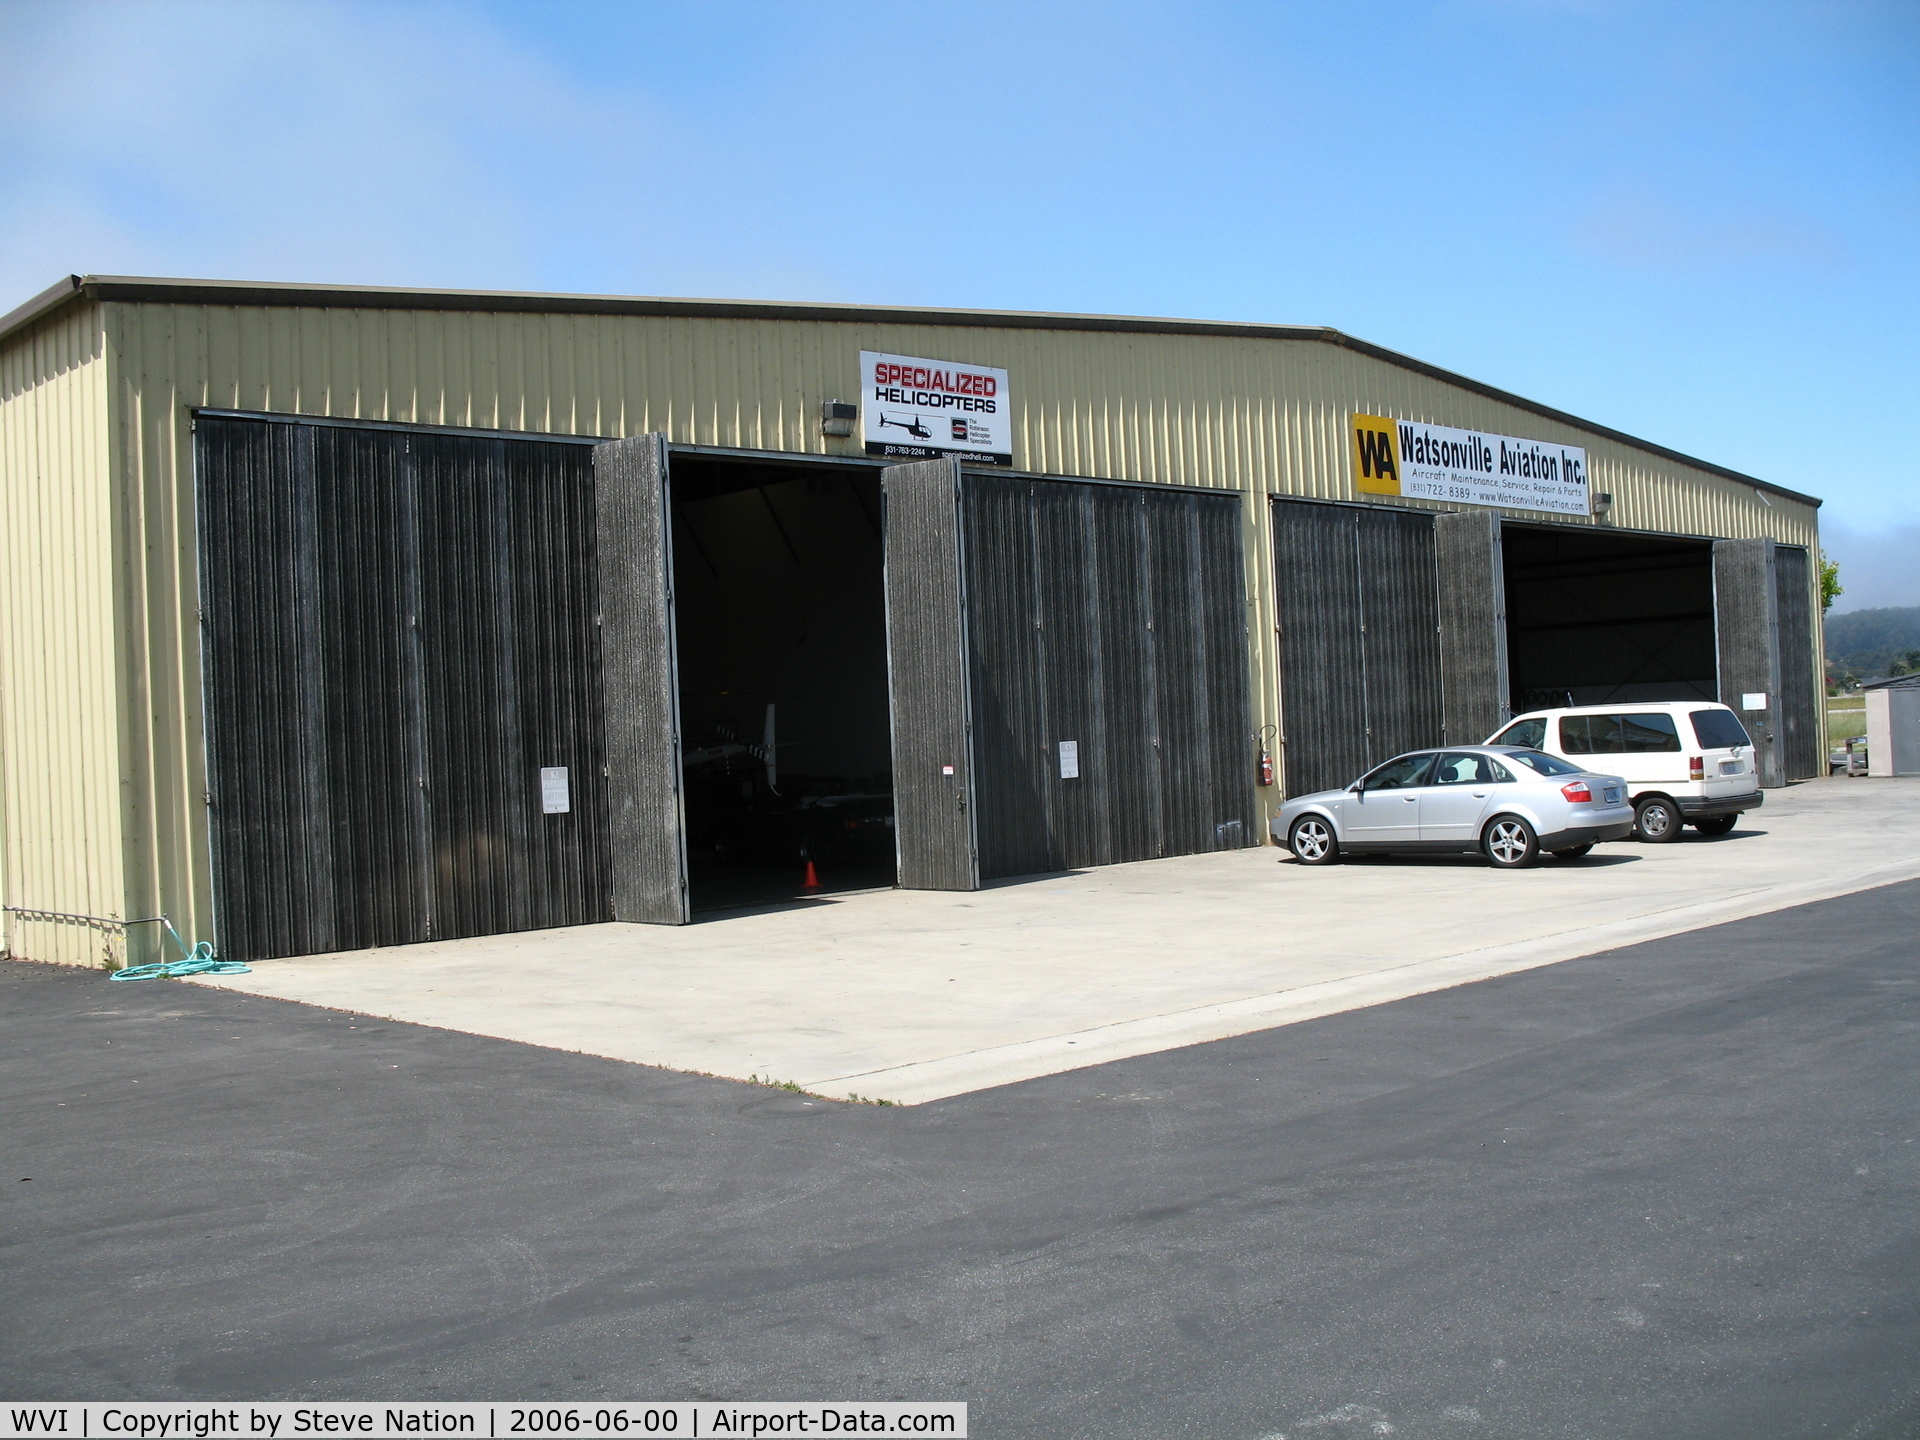 Watsonville Municipal Airport (WVI) - Watsonville Aviation & Specialized Helicopters hangar